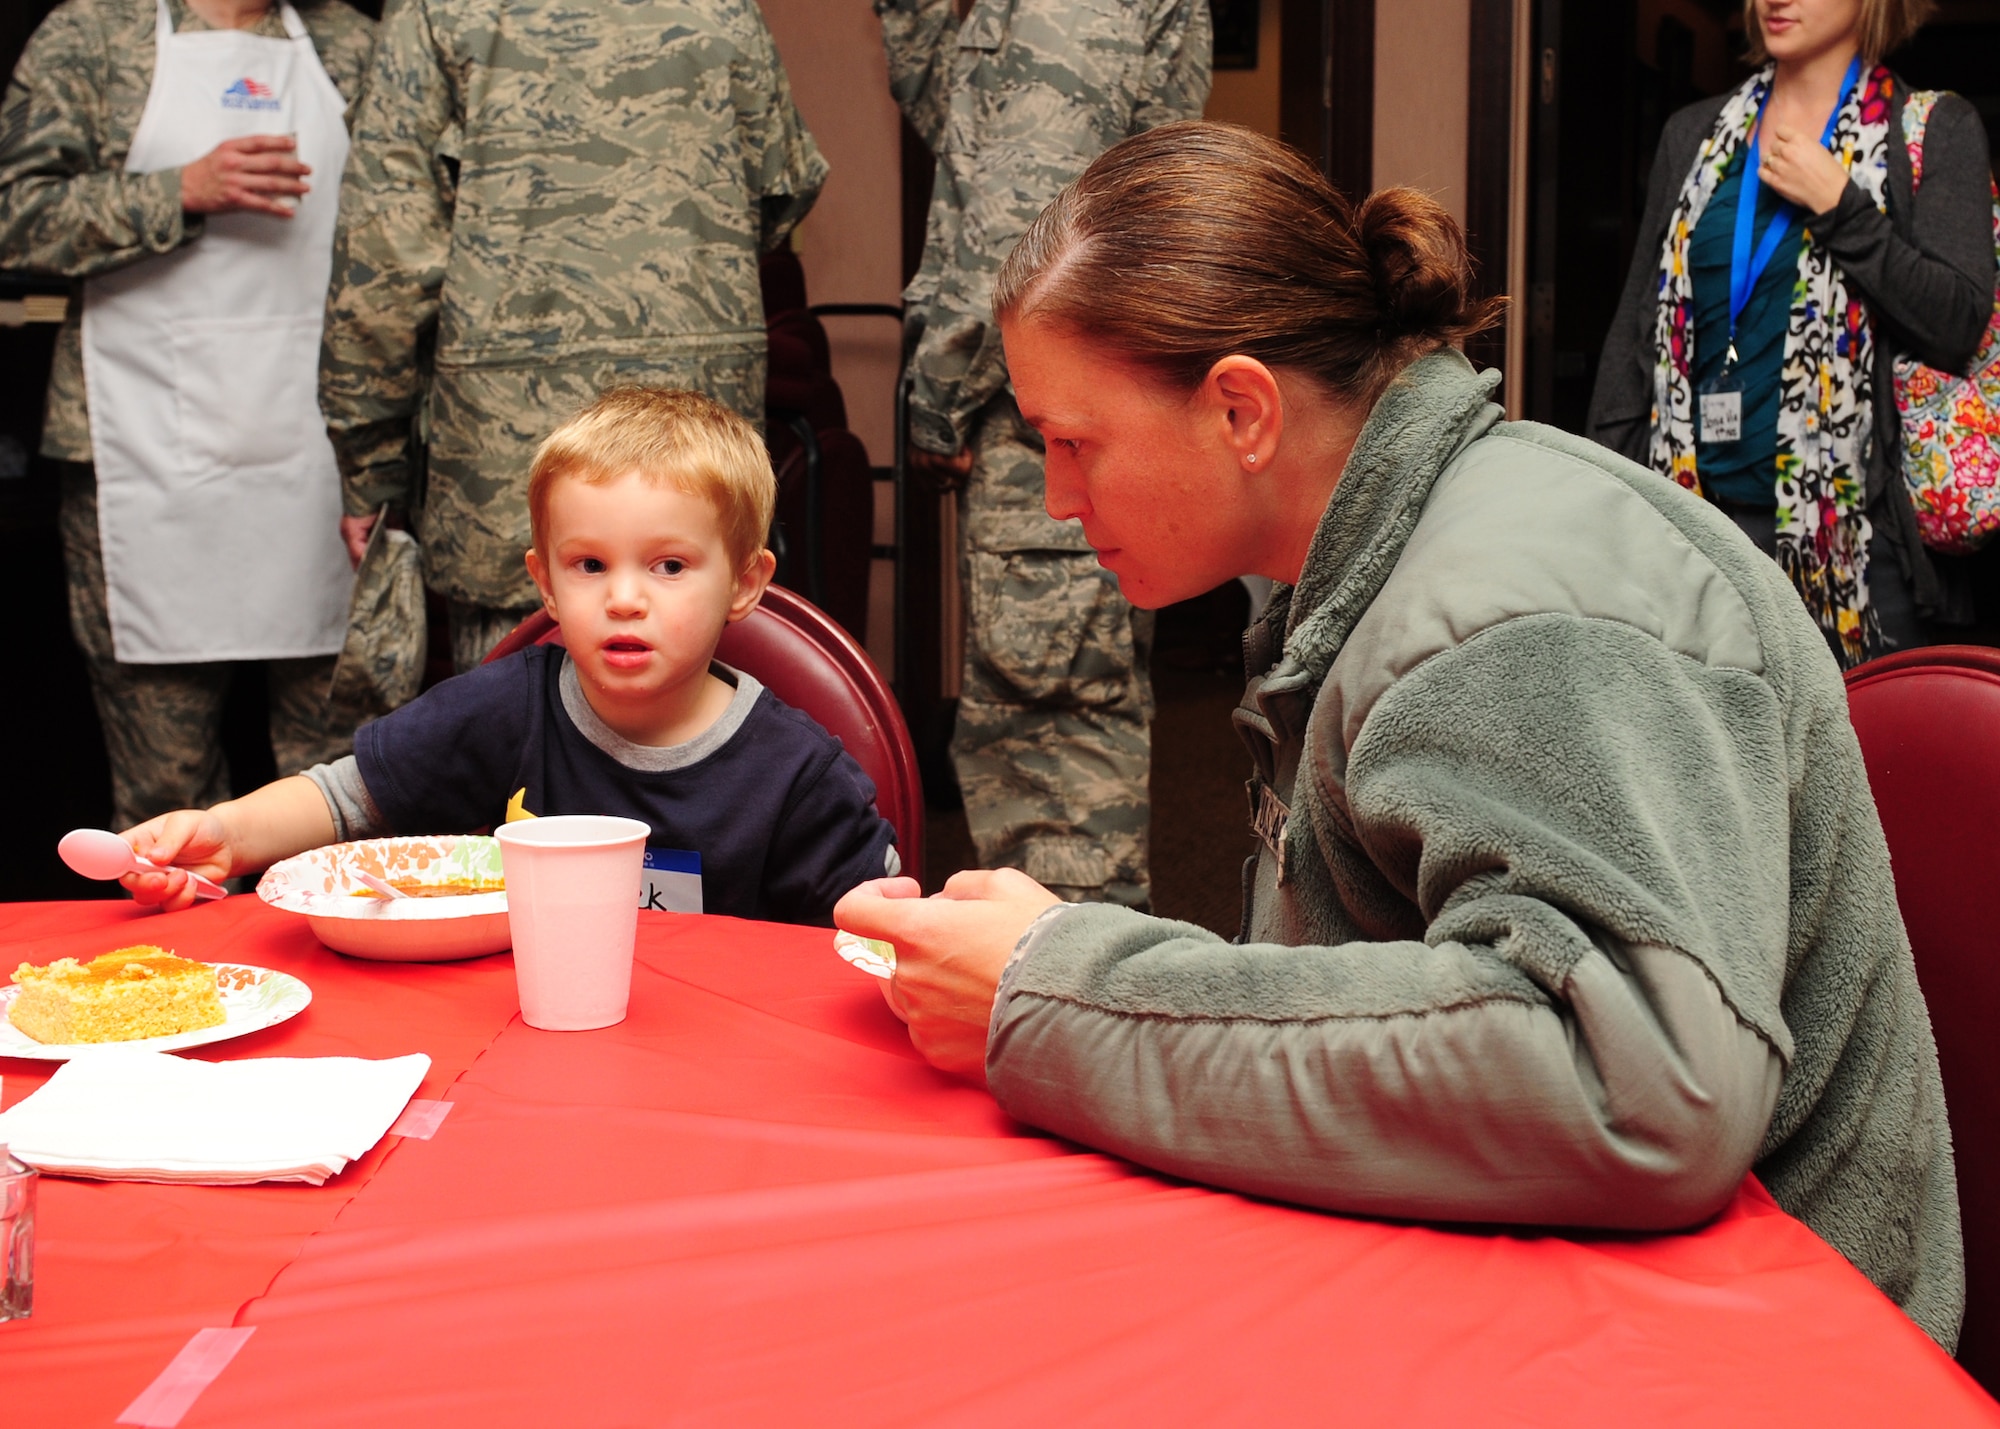 Capt. Christianne Opresko, 9th Physiological Support Squadron physiologist, eats with her son at the Hearts Apart Dinner Dec. 7, 2012. Families of deployed Airmen got together for a night of food, fun, festivities and prizes. (U.S. Air Force photo by Senior Airman Shawn Nickel/Released)